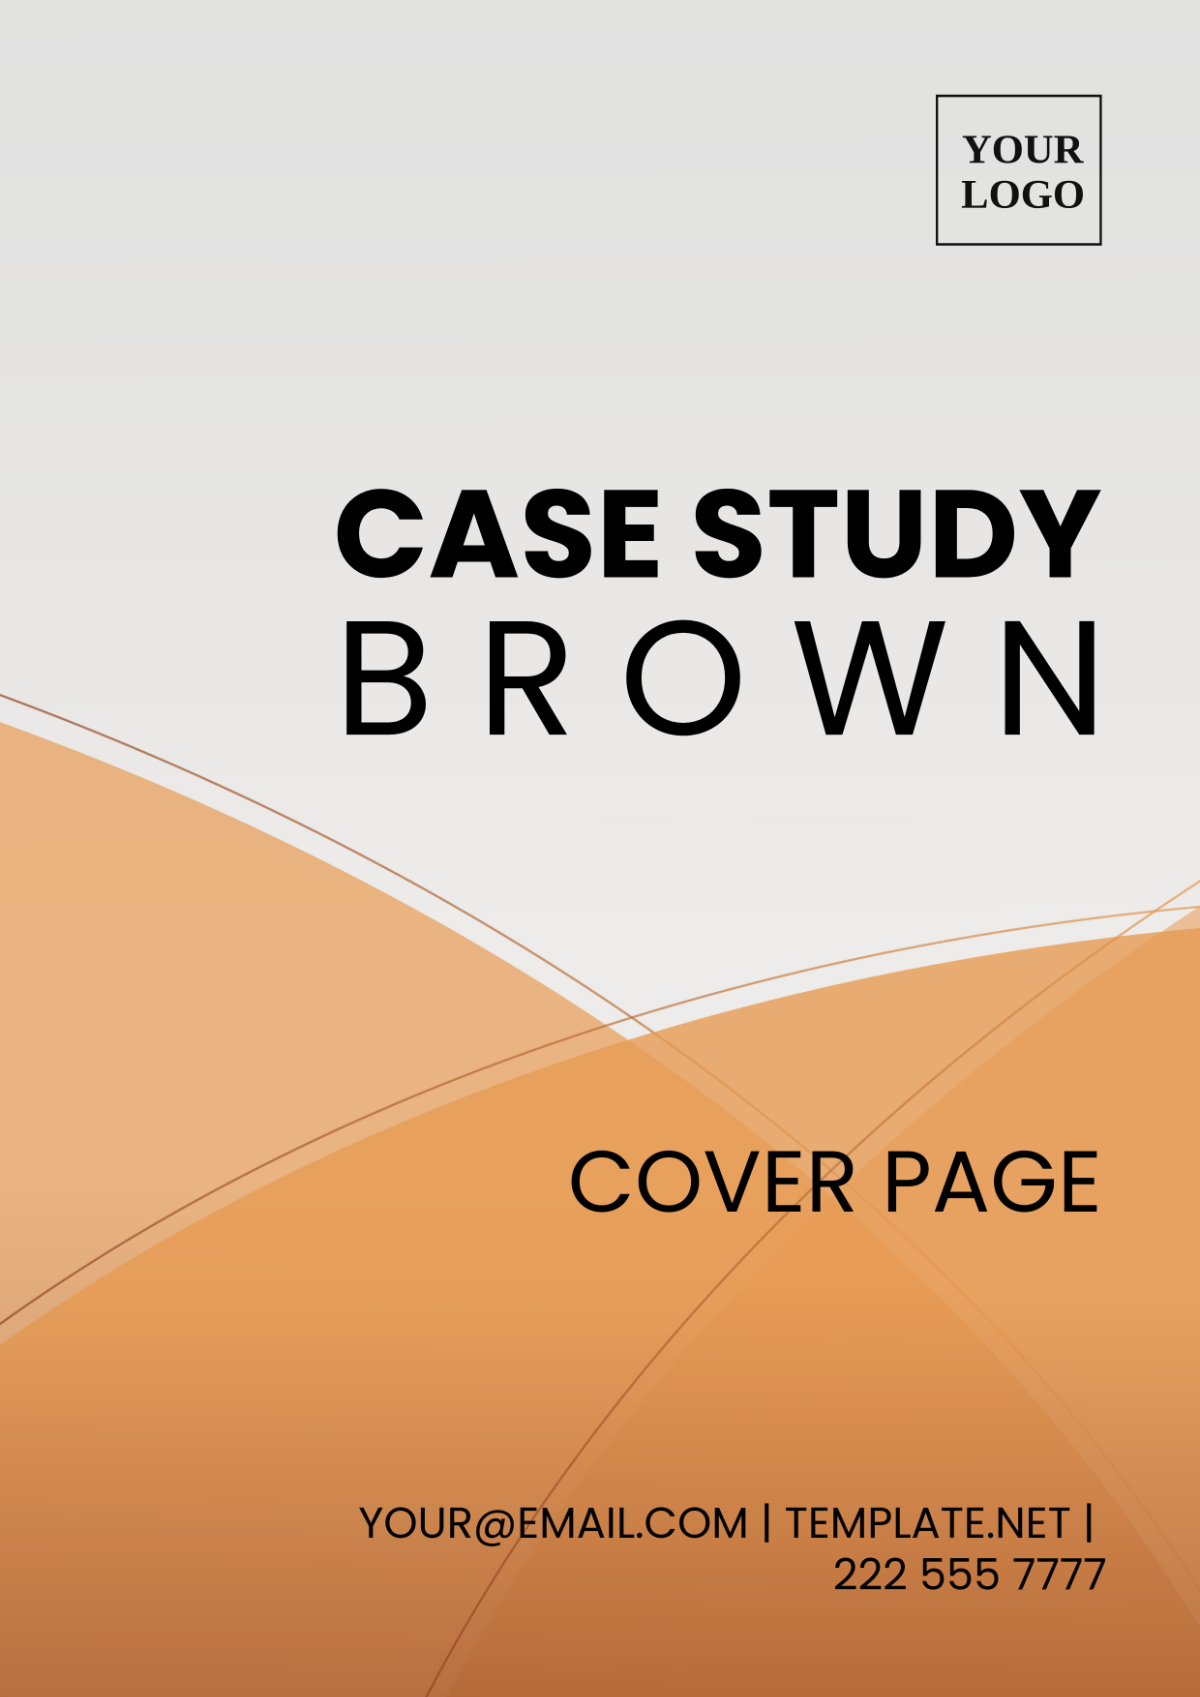 Case Study Brown Cover Page